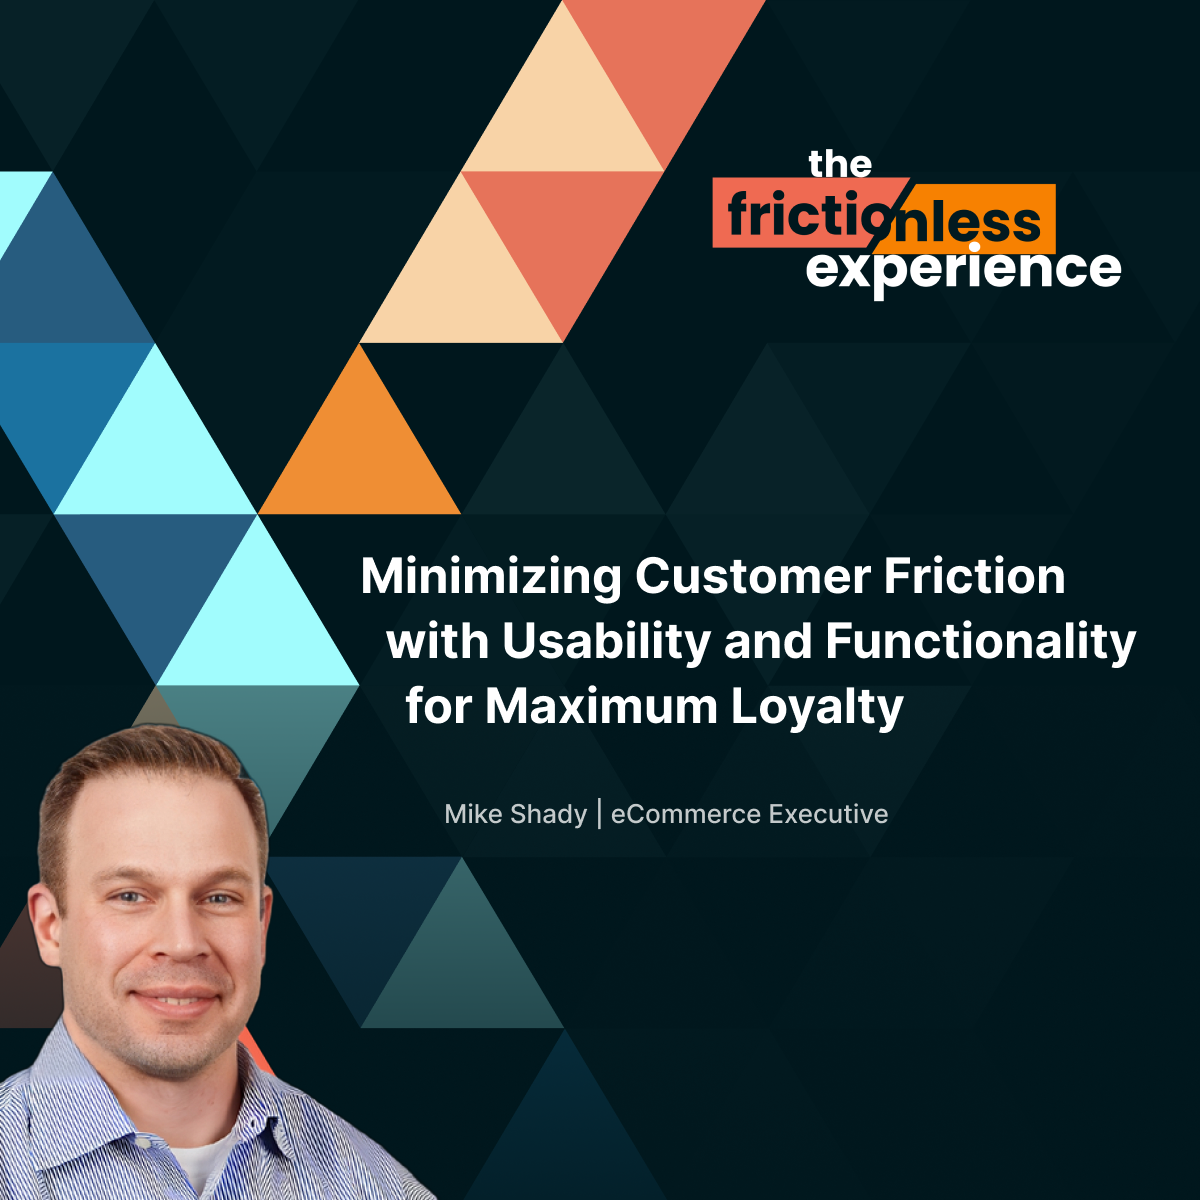 Minimizing Customer Friction & Functionality for Maximum Loyalty with Mike Shady from Lowe's